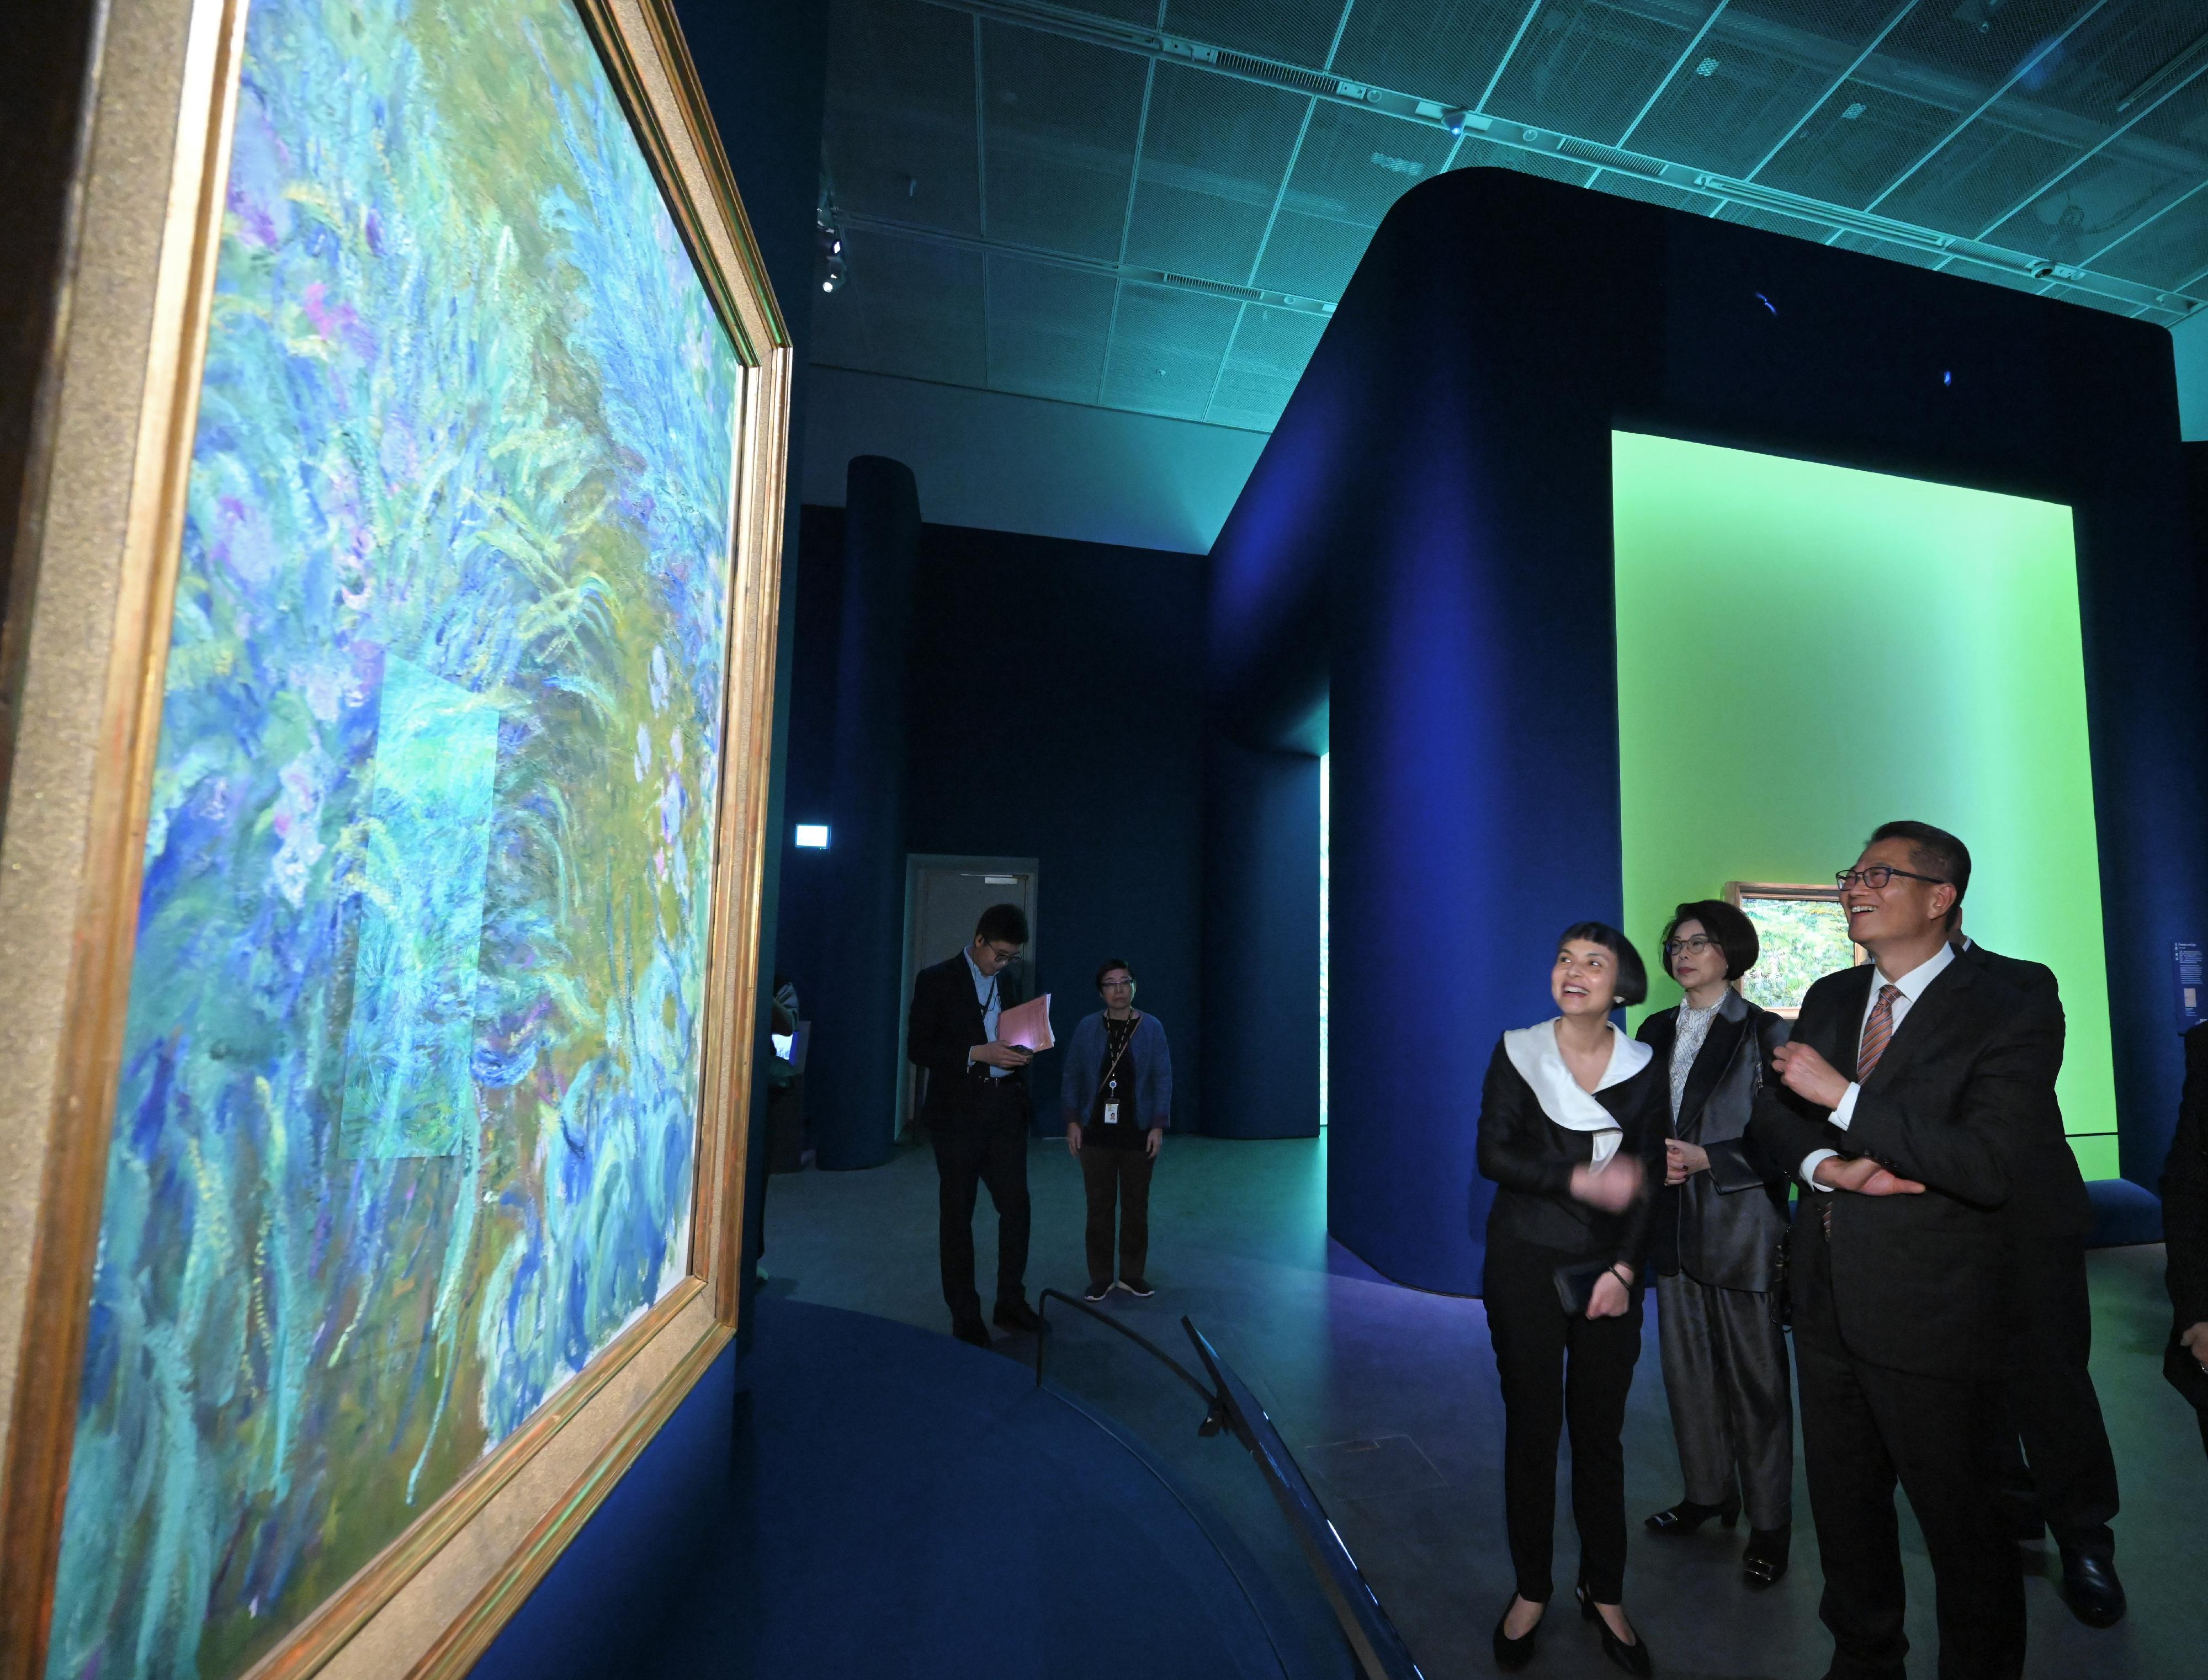 The Financial Secretary, Mr Paul Chan, attended the opening ceremony of the "Botticelli to Van Gogh: Masterpieces from the National Gallery, London" Special Exhibition today (November 21). Photo shows Mr Chan (first right) touring the exhibition.